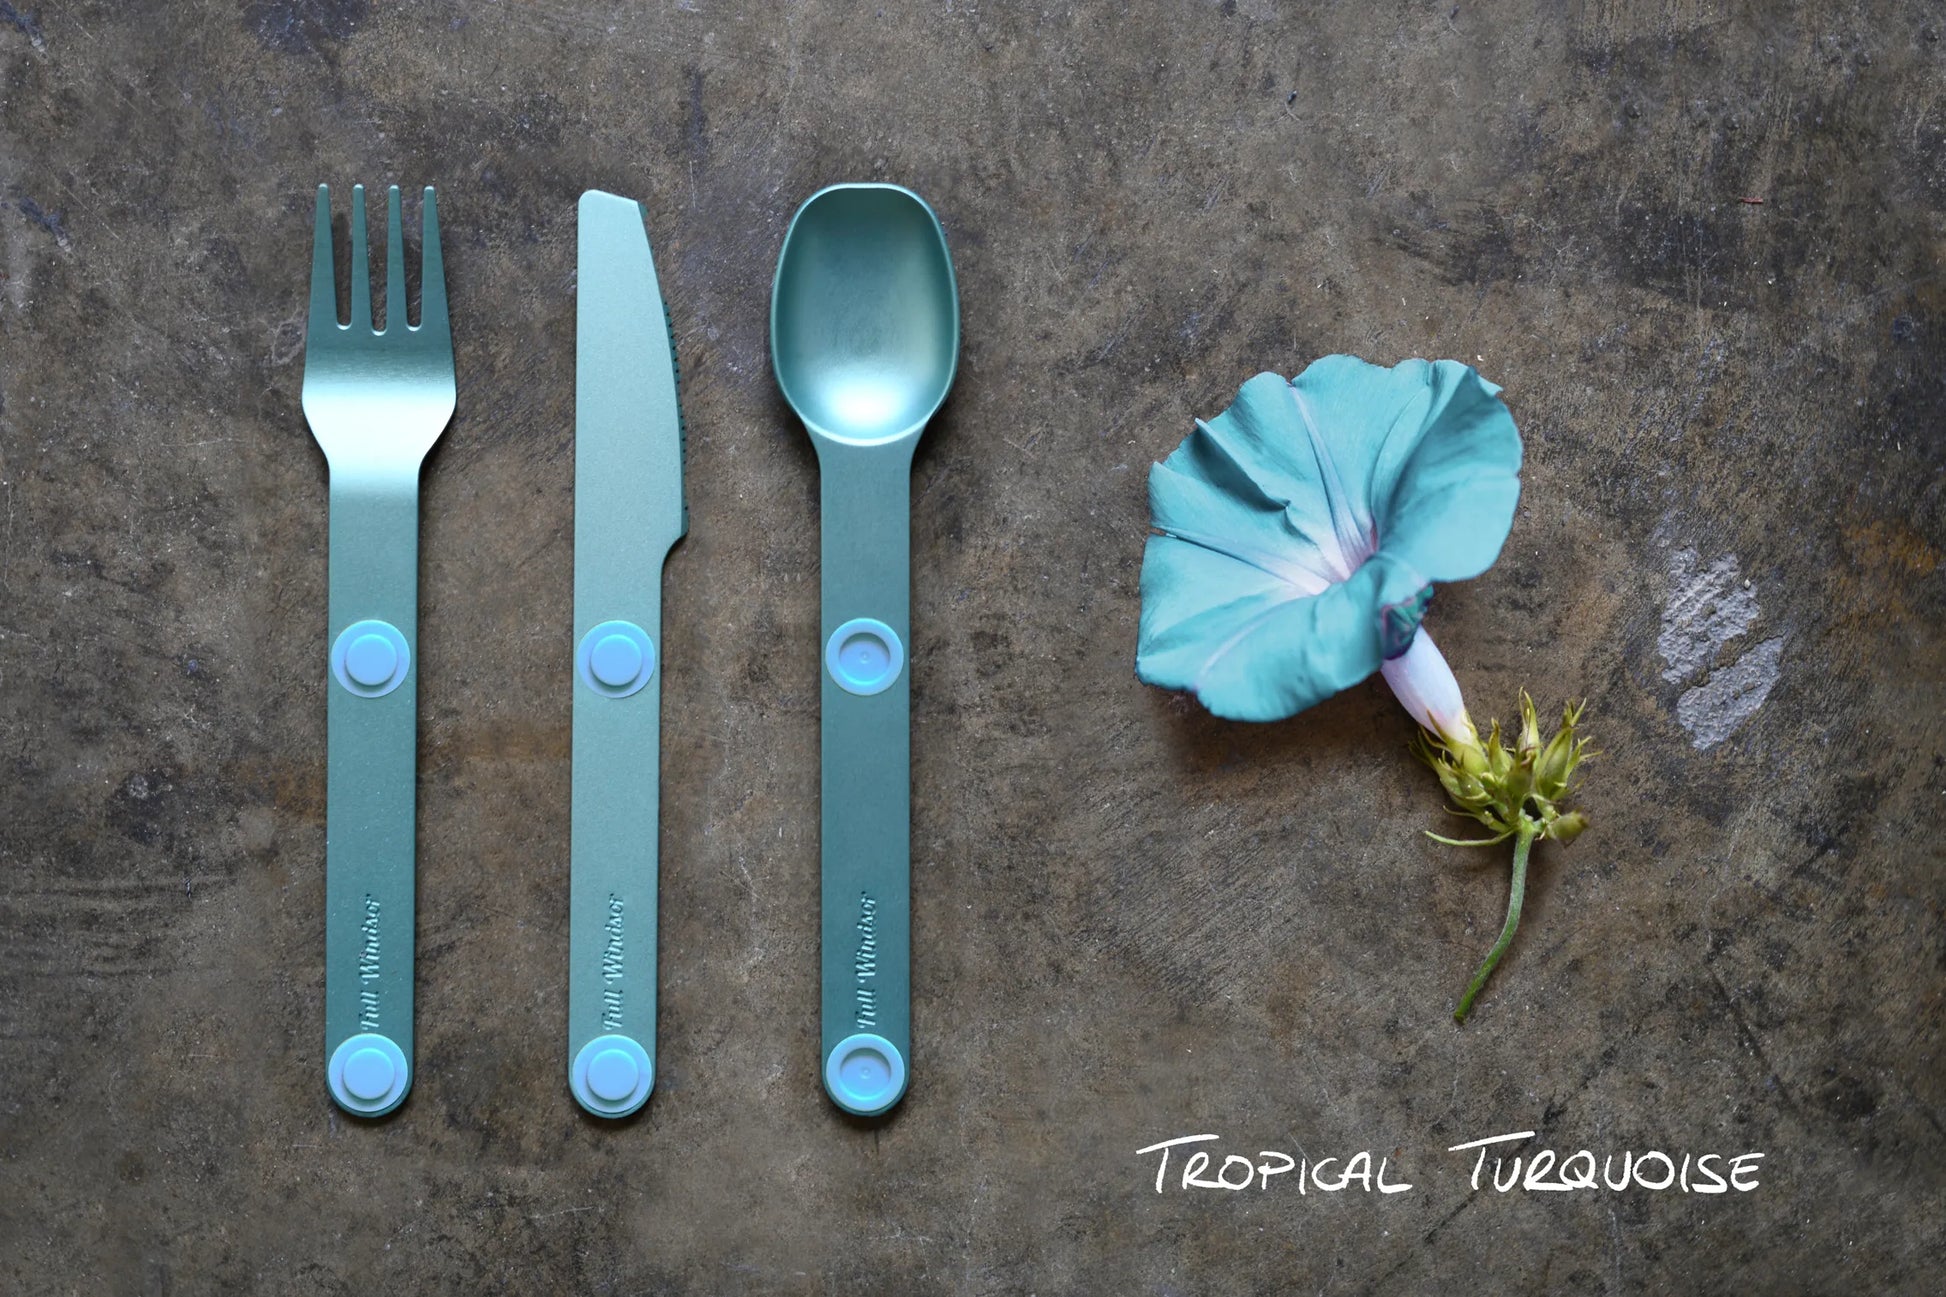 Turquoise fork, knife and spoon next to turquoise flower.